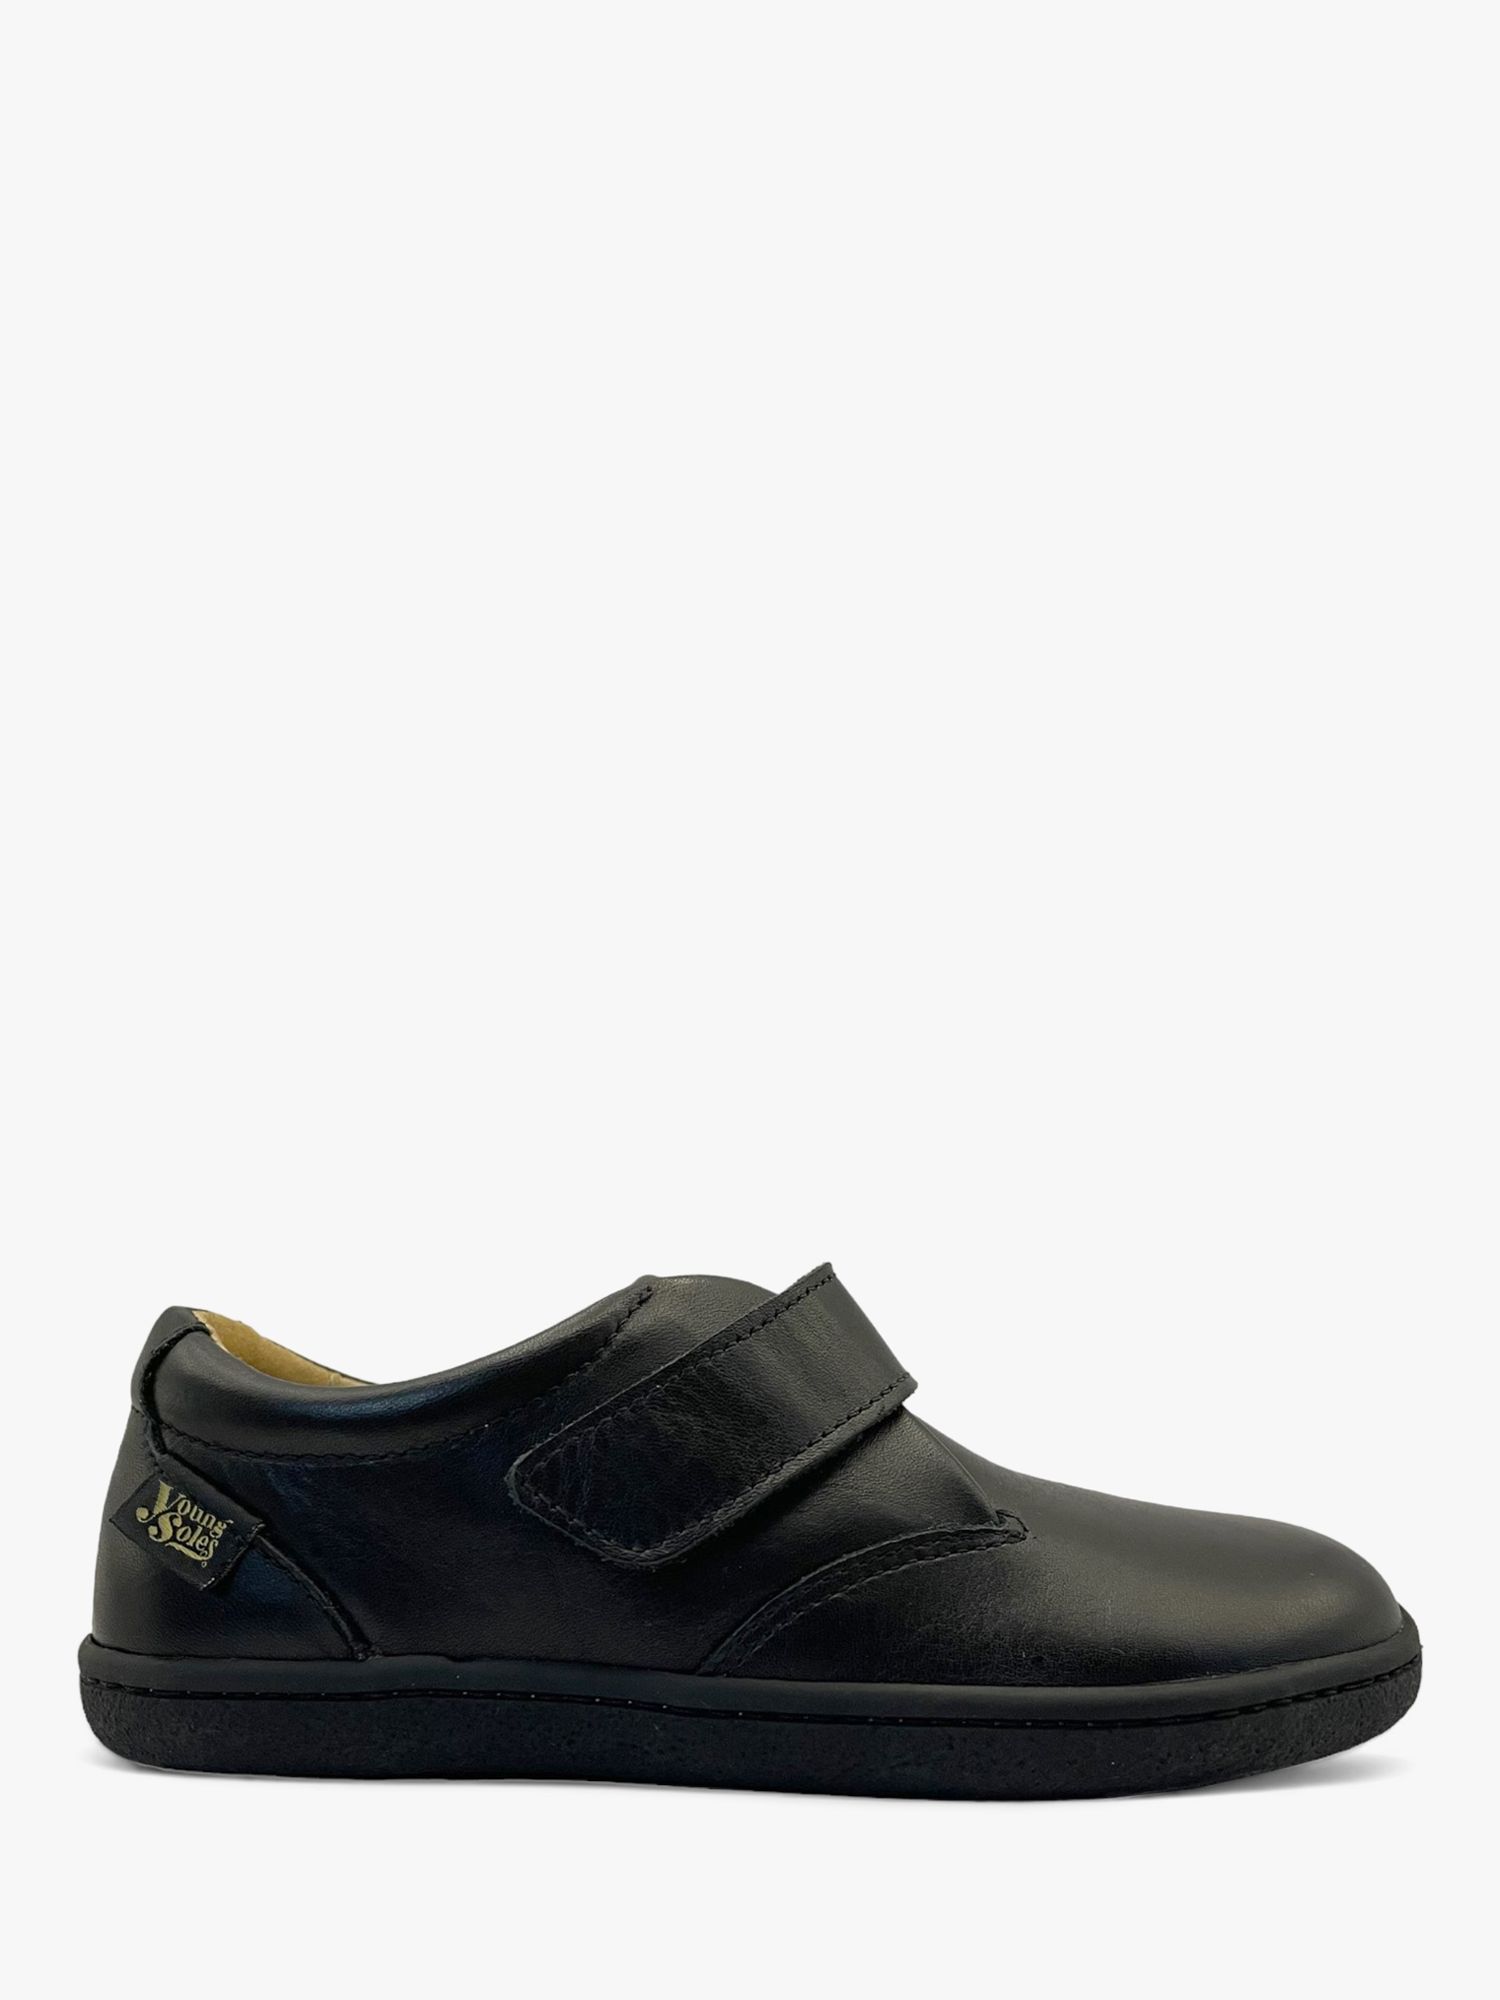 Young Soles Kids' Leather Oliver Shoes, Black, 8 Jnr